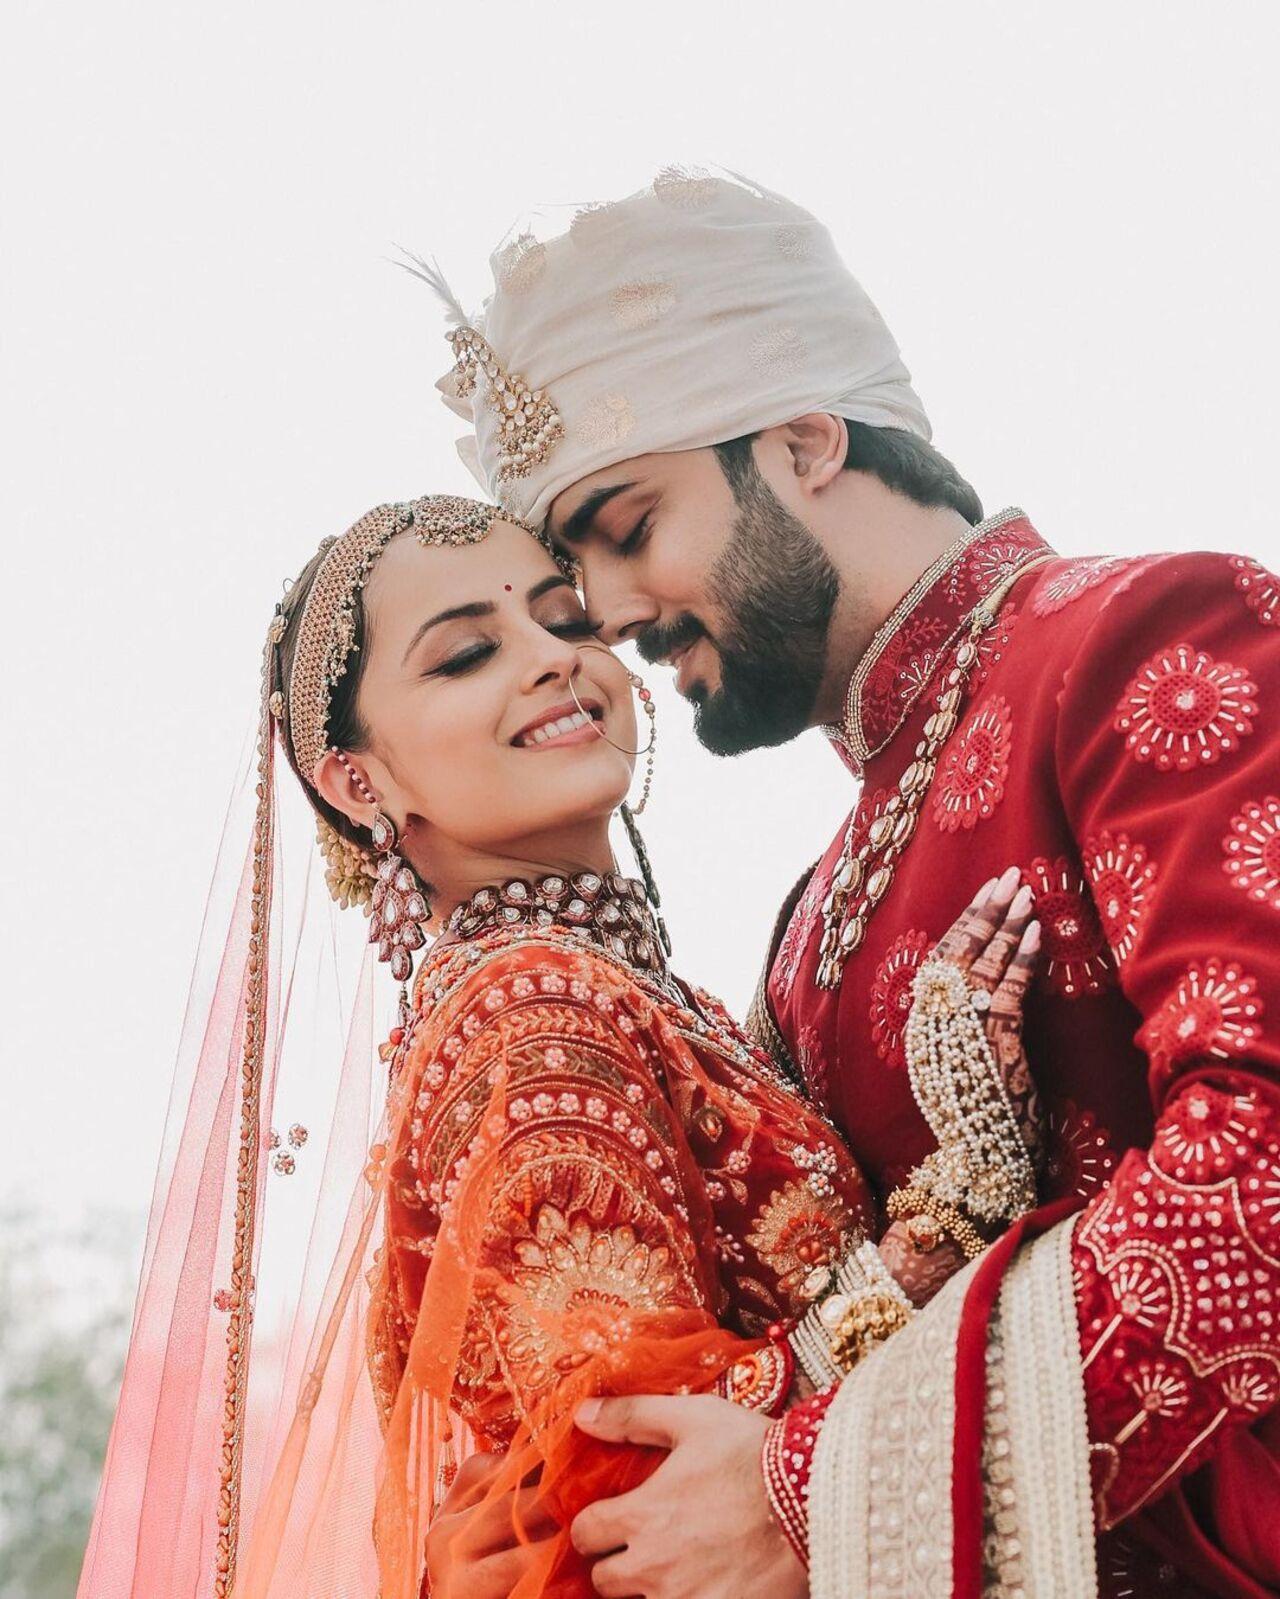 Shrenu was dressed in bridal red in the pictures she shared on Instagram. The beautiful lehenga was adorned with tasteful golden zari work. The lehnga itself featured beautiful patterns that were a sight to behold